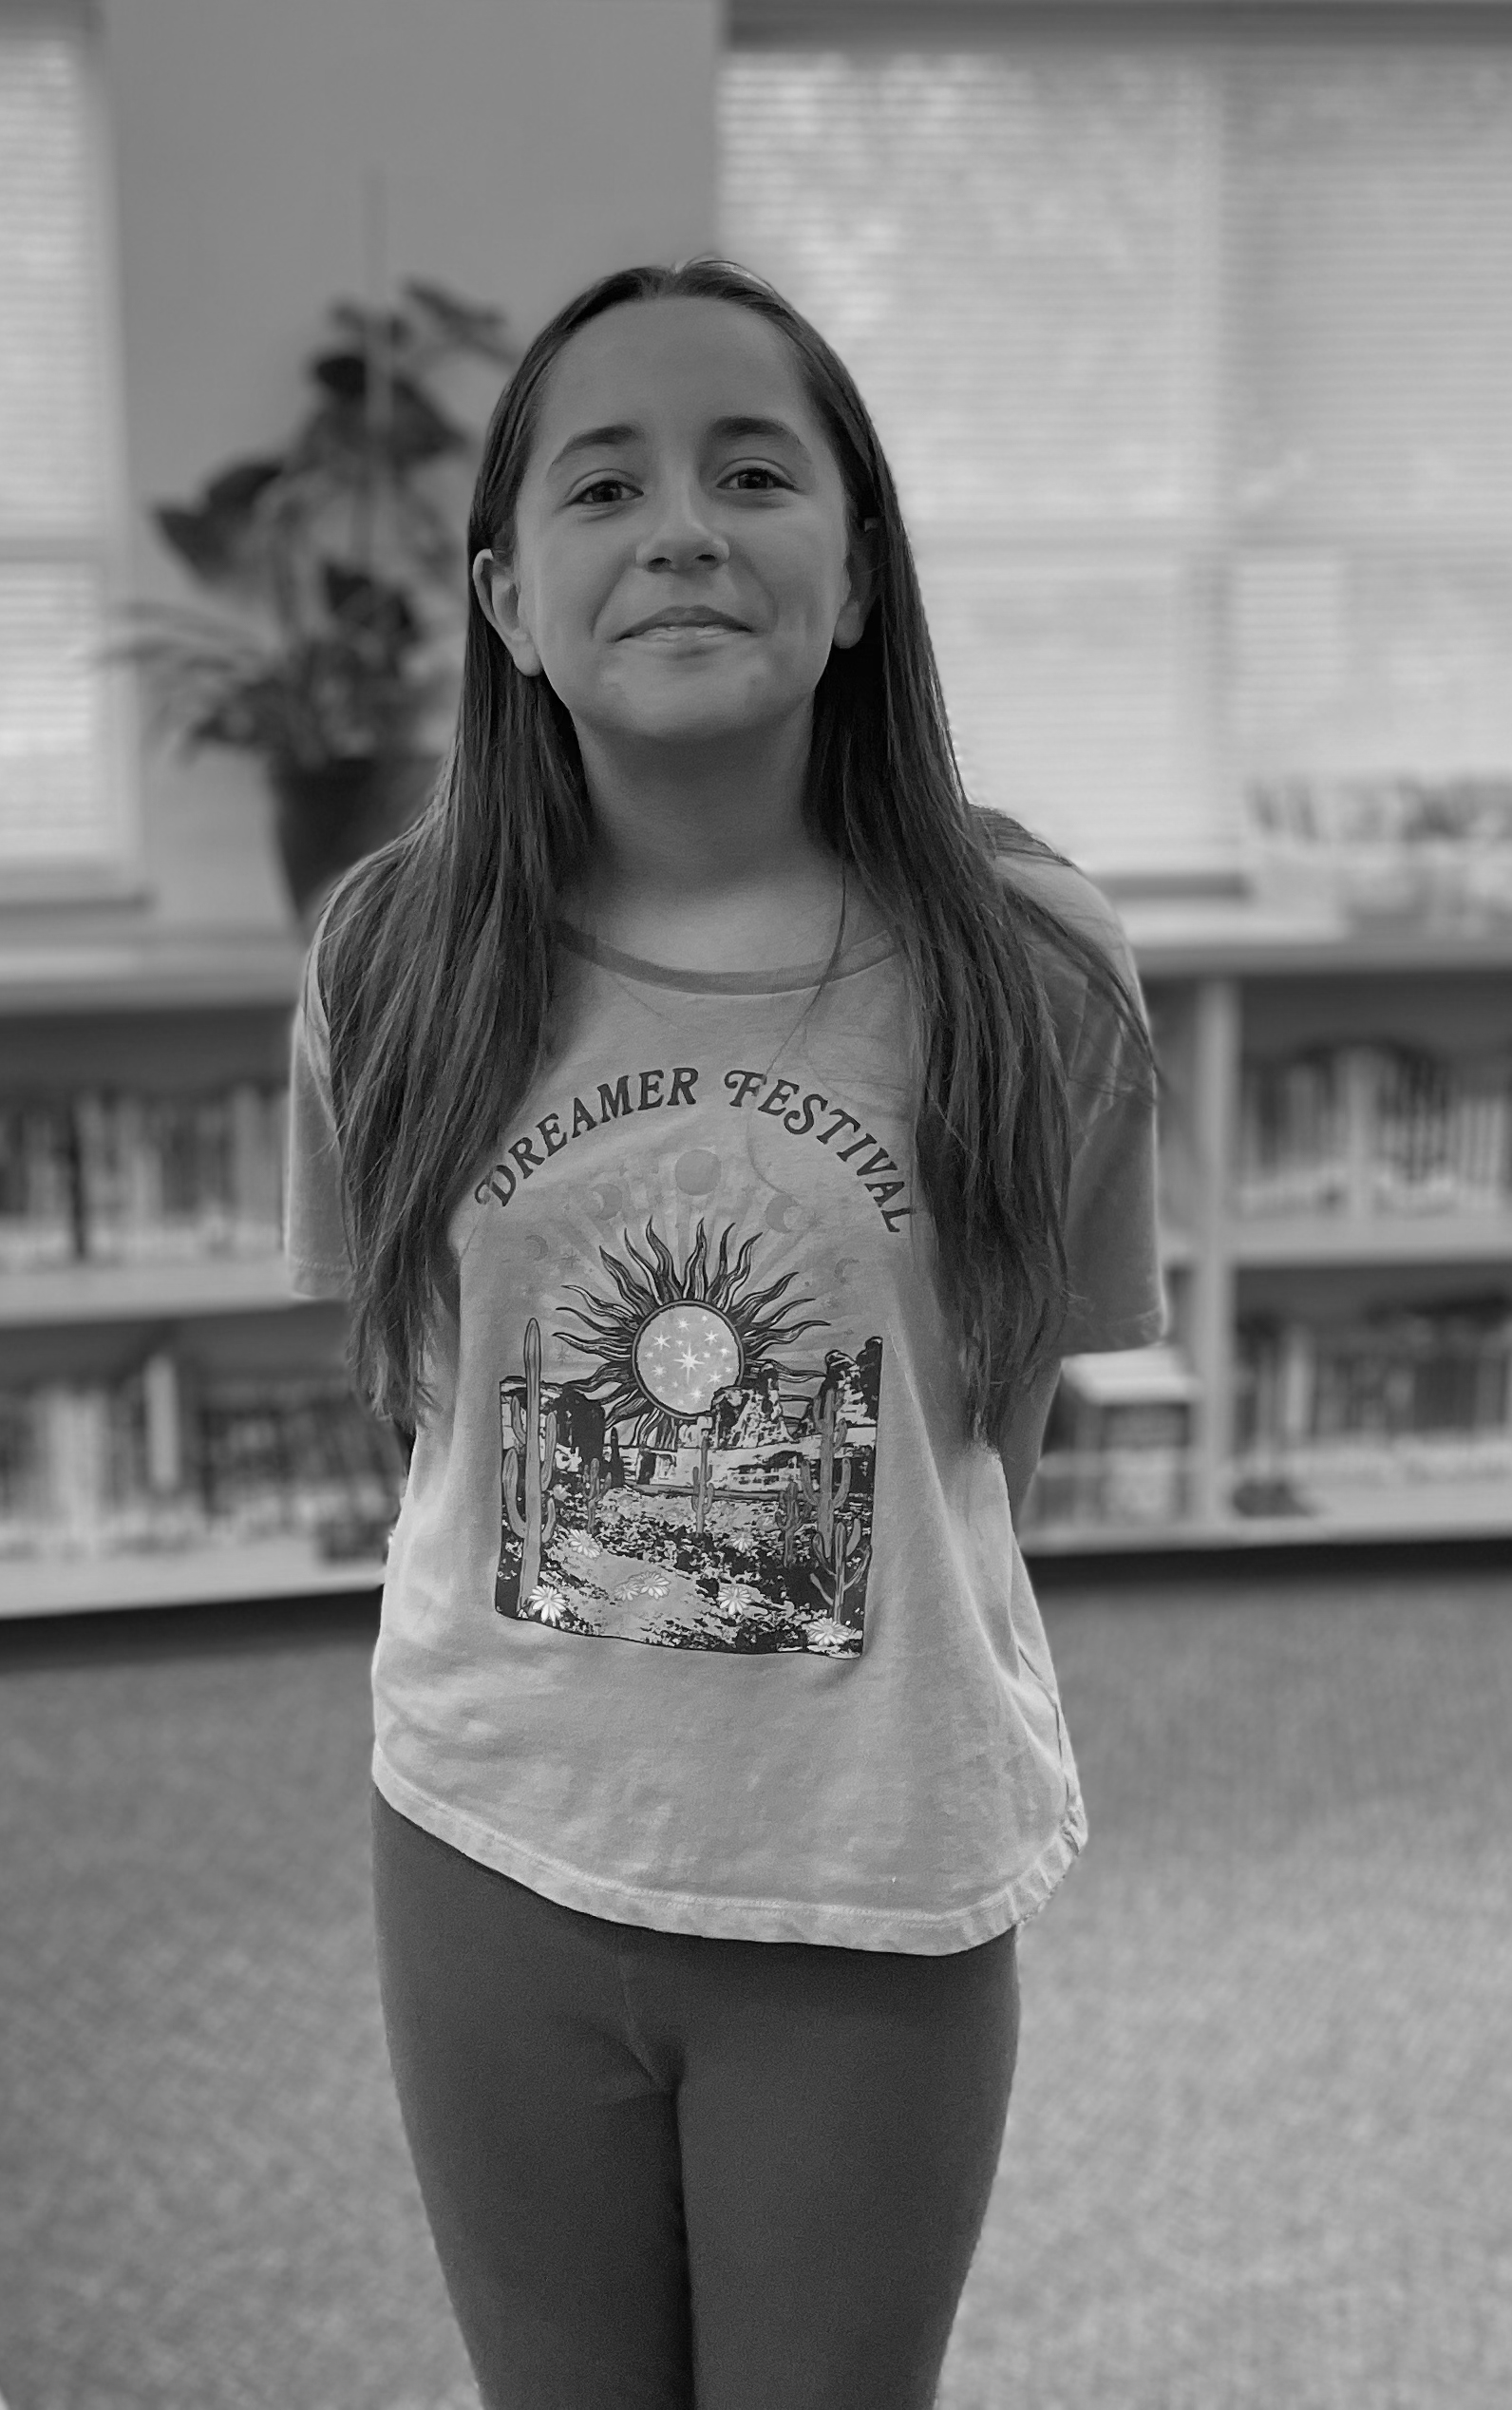 Mia, a fifth-grade student at Eisenhower Elementary School